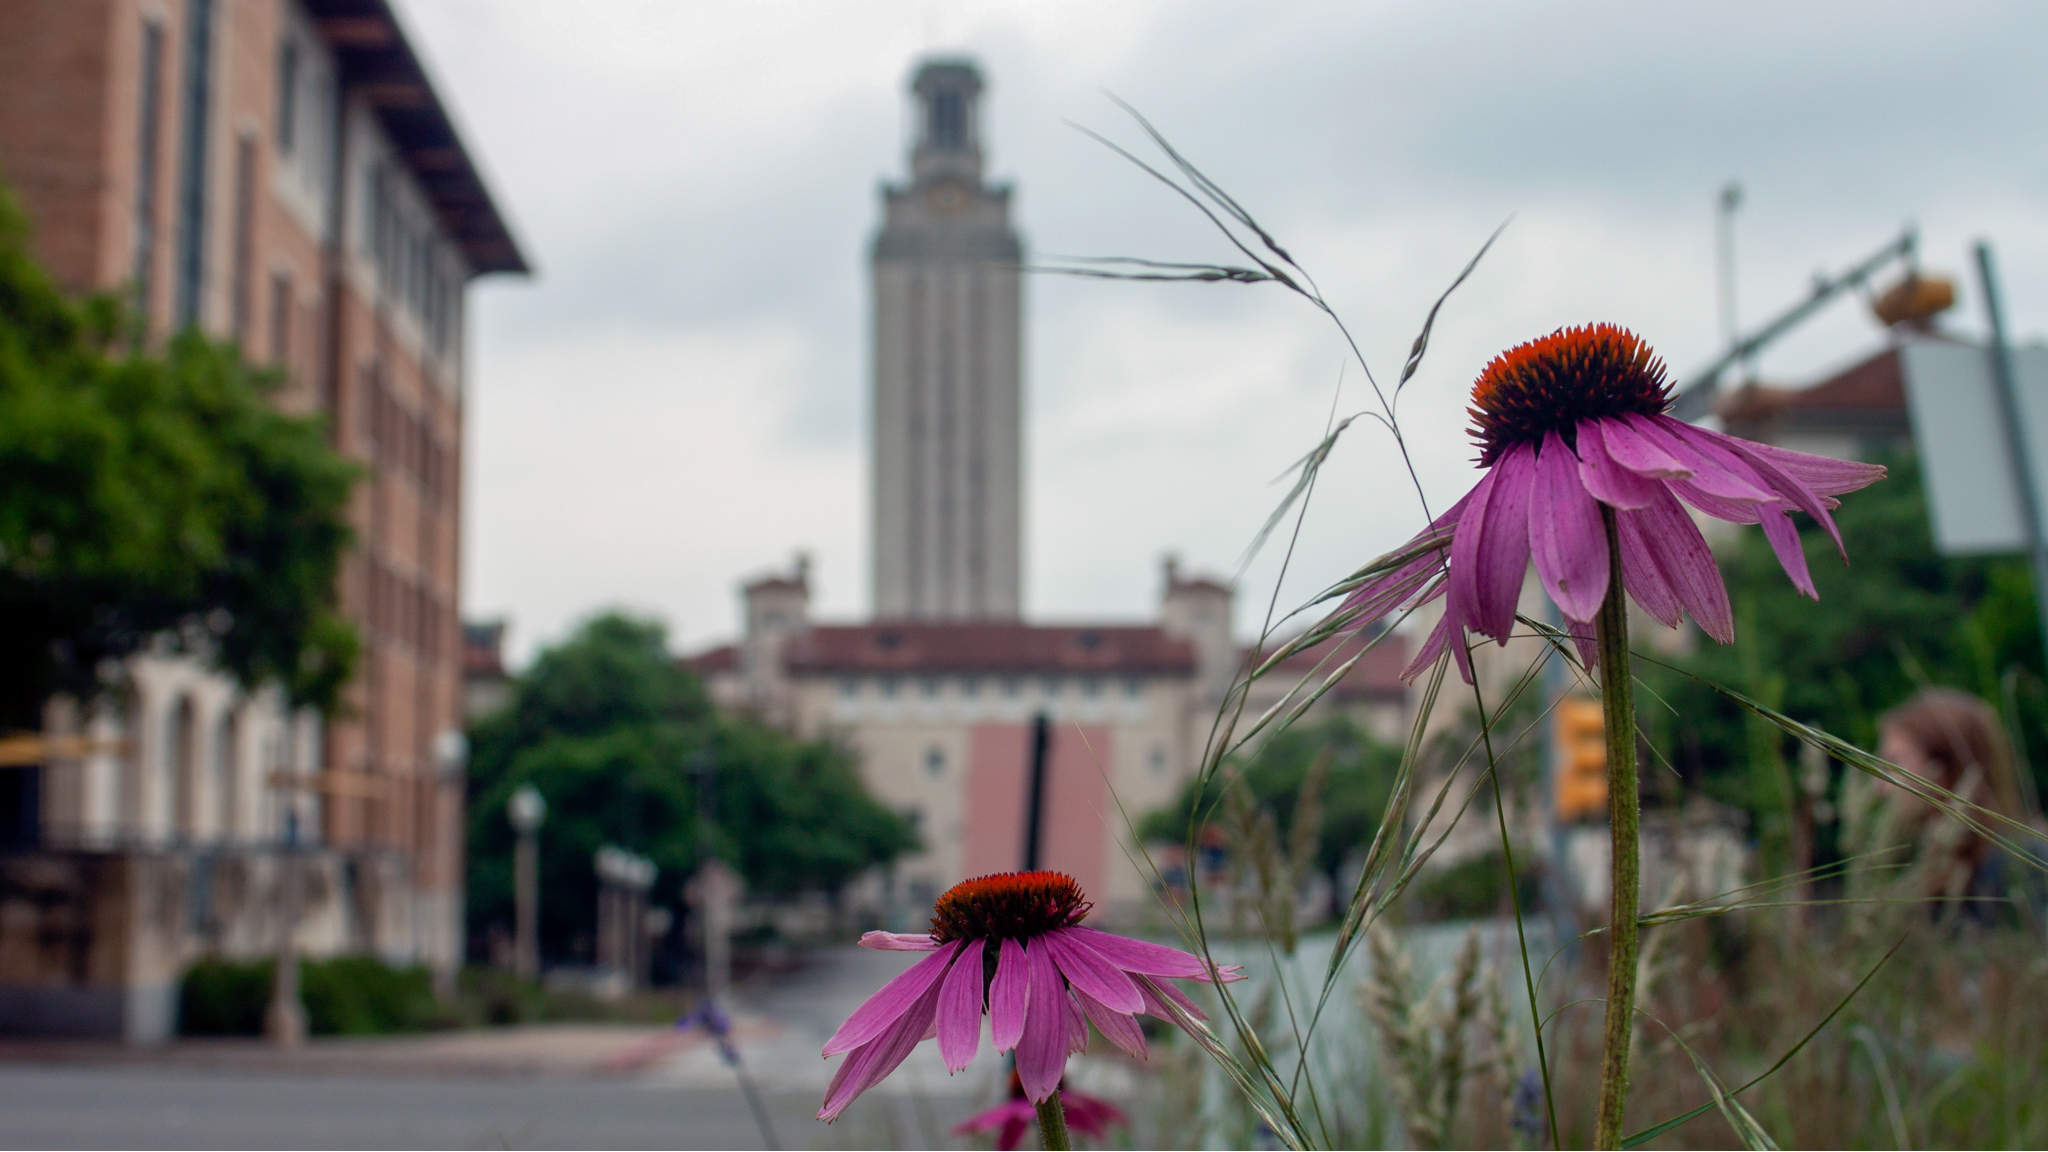 Prairie flowers bloom with UT Tower as a backdrop